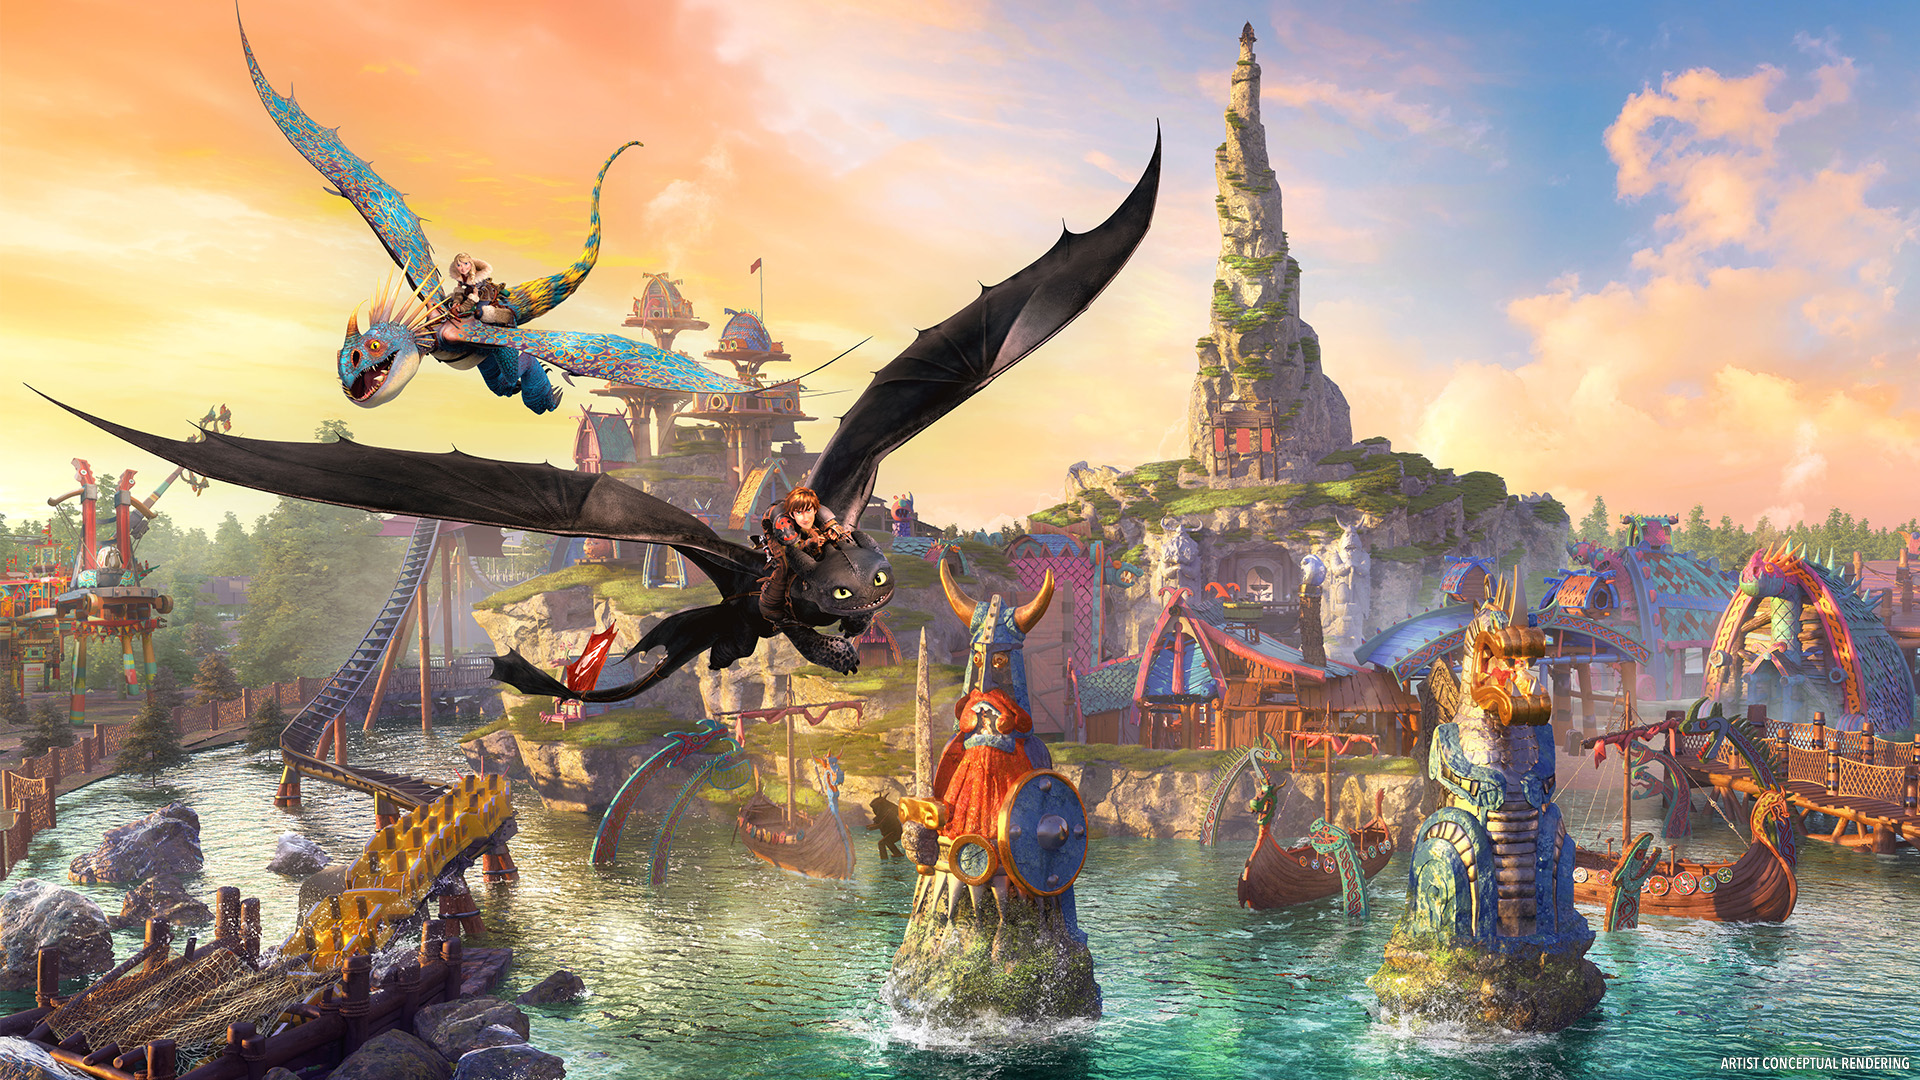 Unveiling How To Train Your Dragon Land: An Inside Look at Epic Universe’s Newest Theme Park Addition